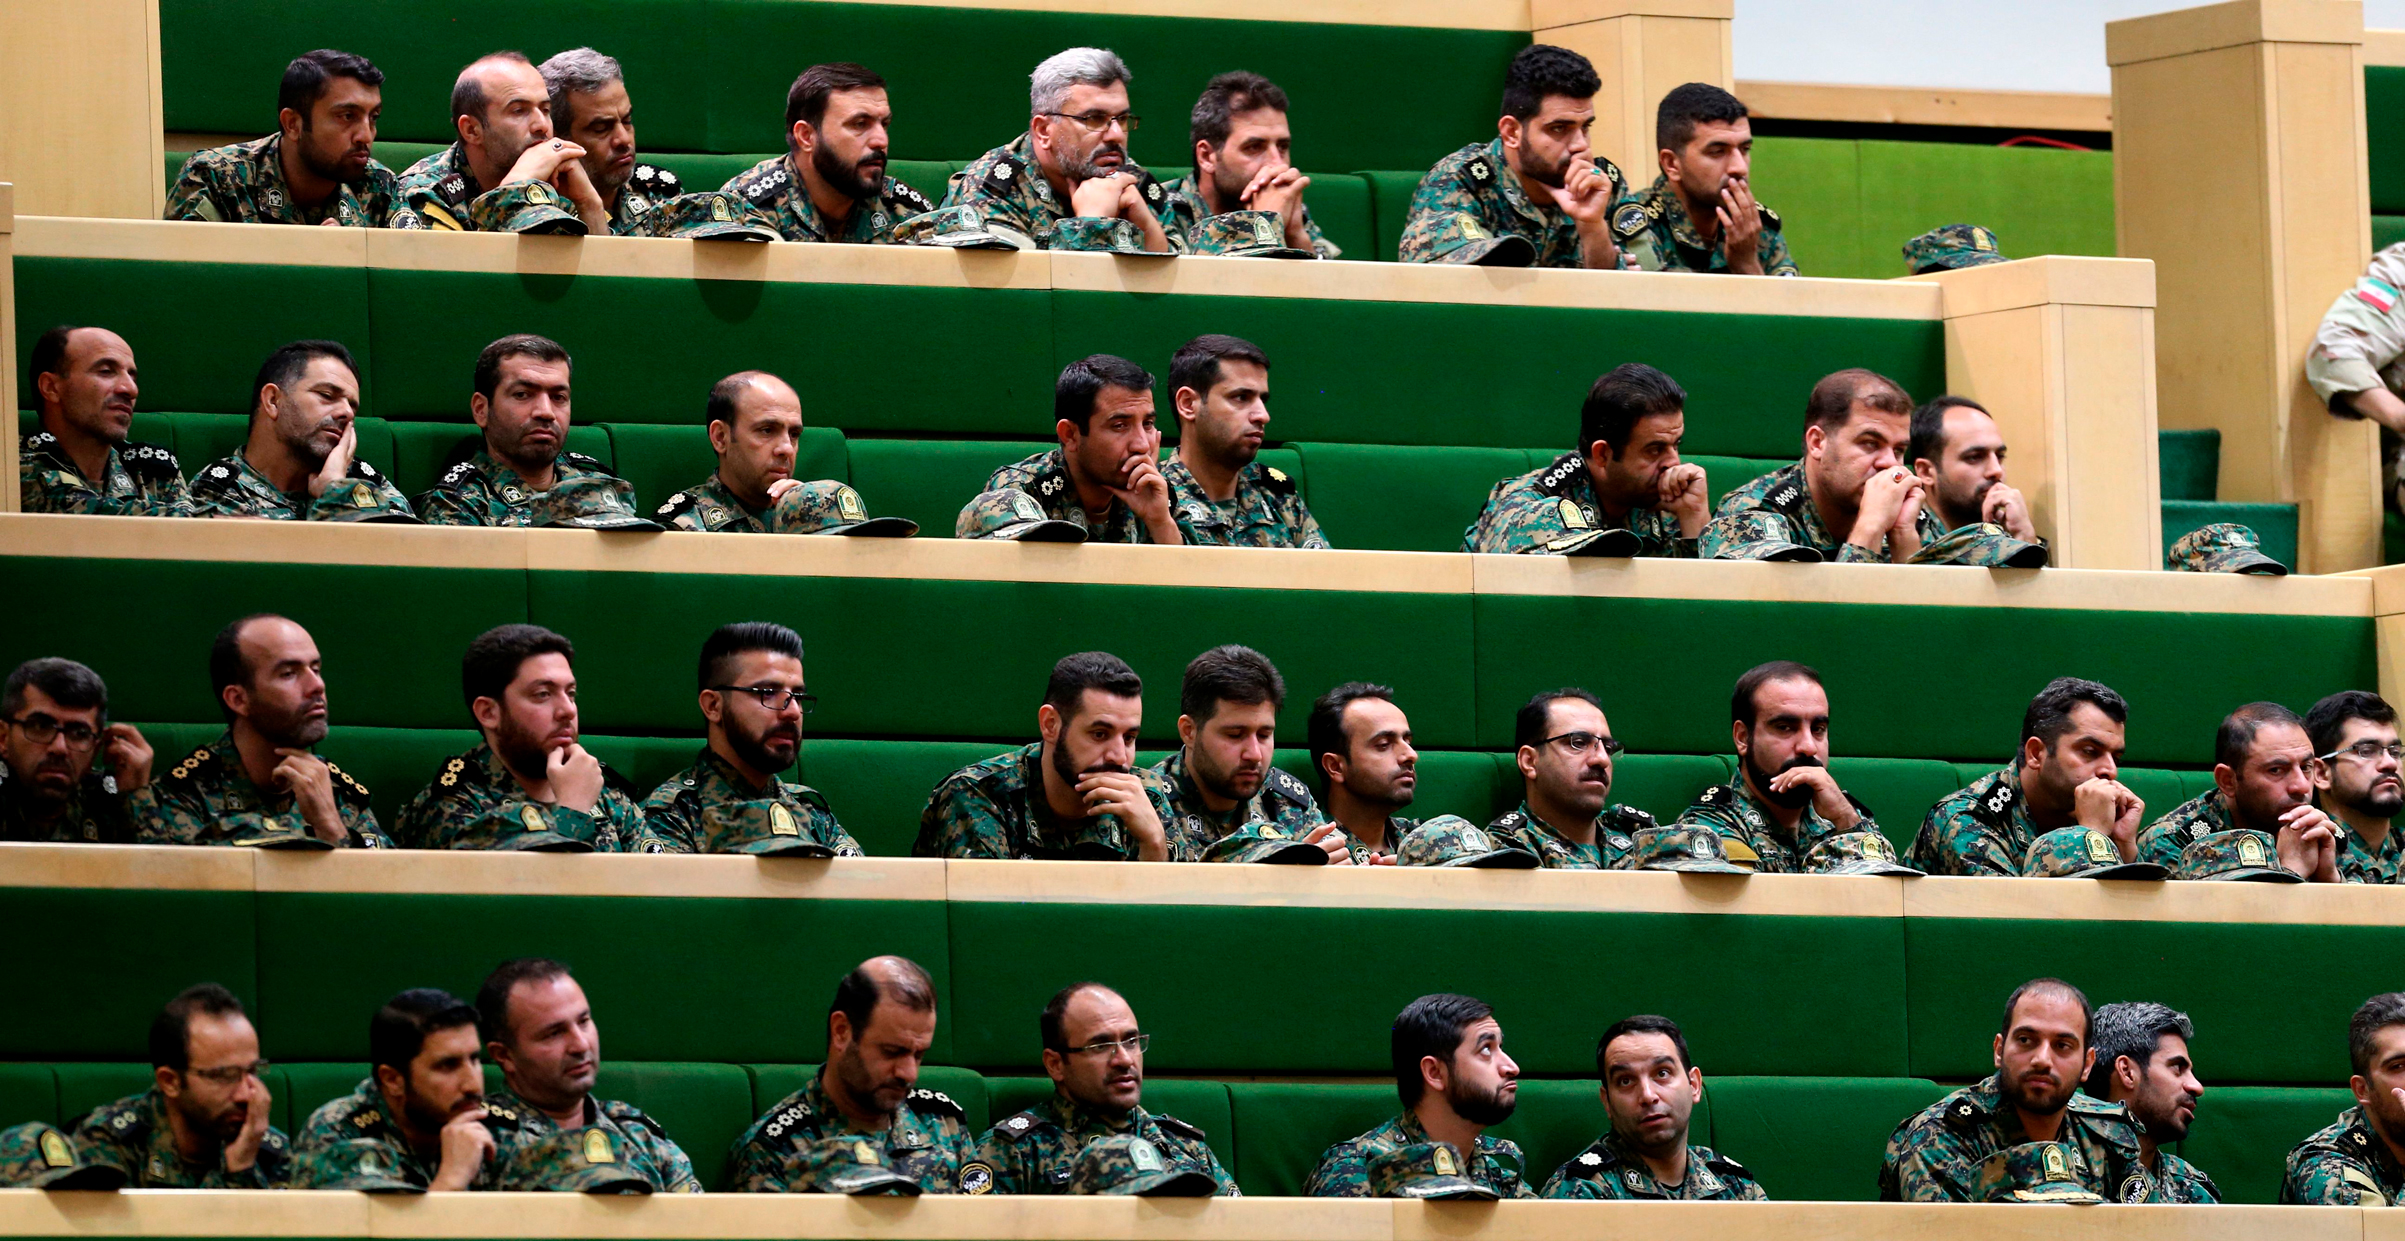 Members of the Iranian Revolutionary Guard Corps listen to a speech in parliament in Tehran on Oct. 7, 2018. (Atta Kenare—AFP/Getty Images)